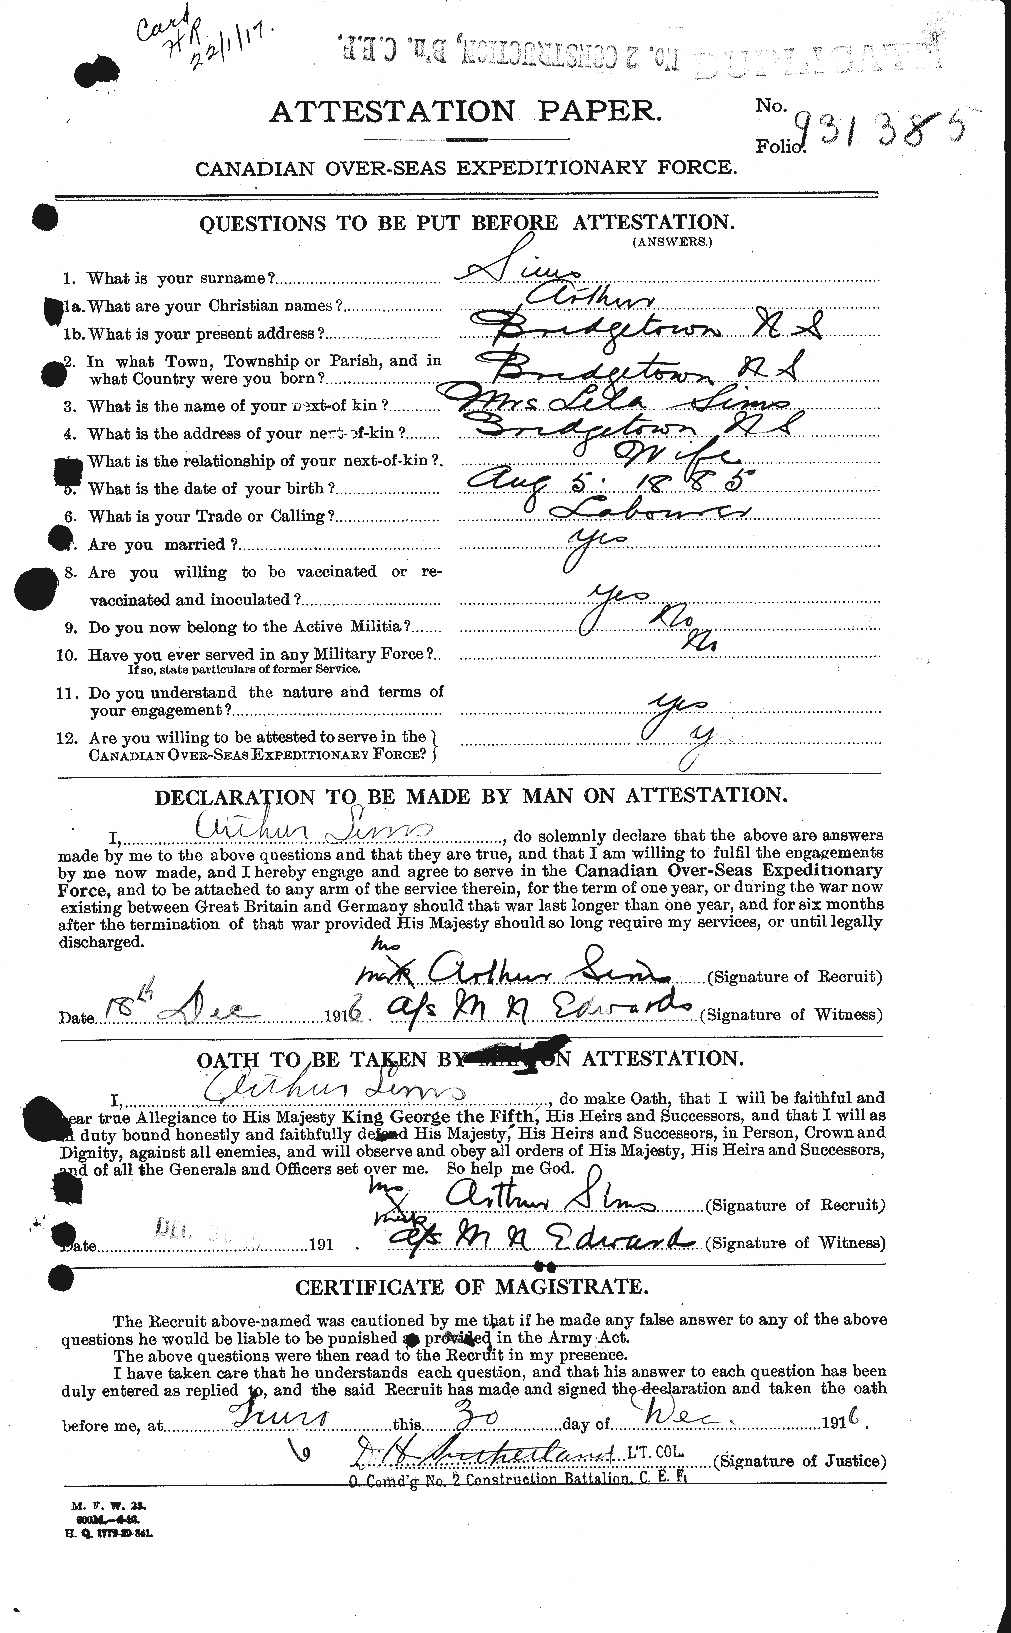 Personnel Records of the First World War - CEF 097801a